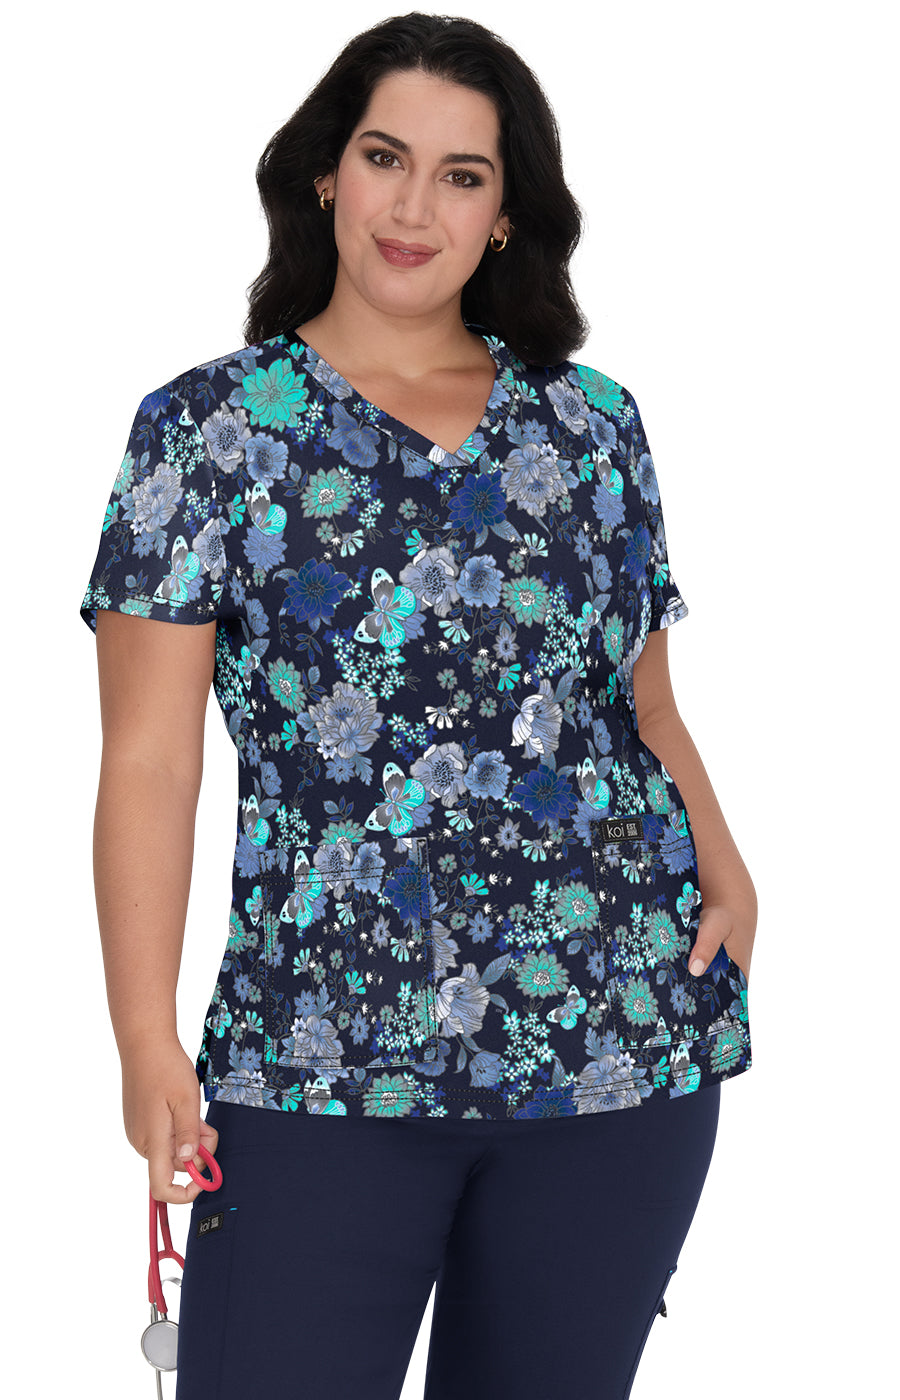  lcepcy - clearance items for women, clearance womens